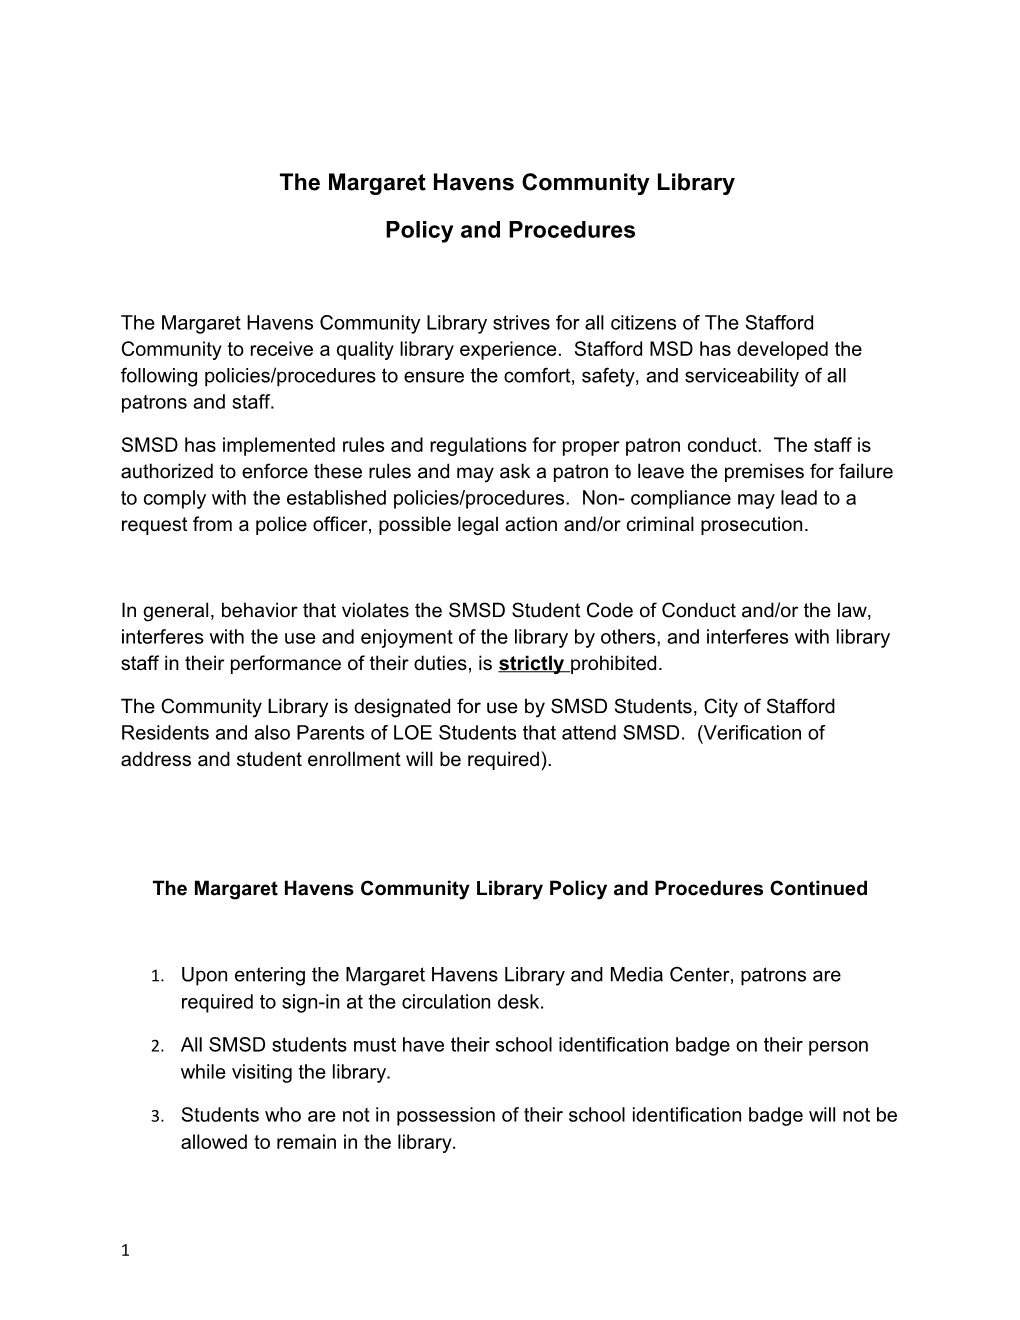 The Margaret Havens Community Library